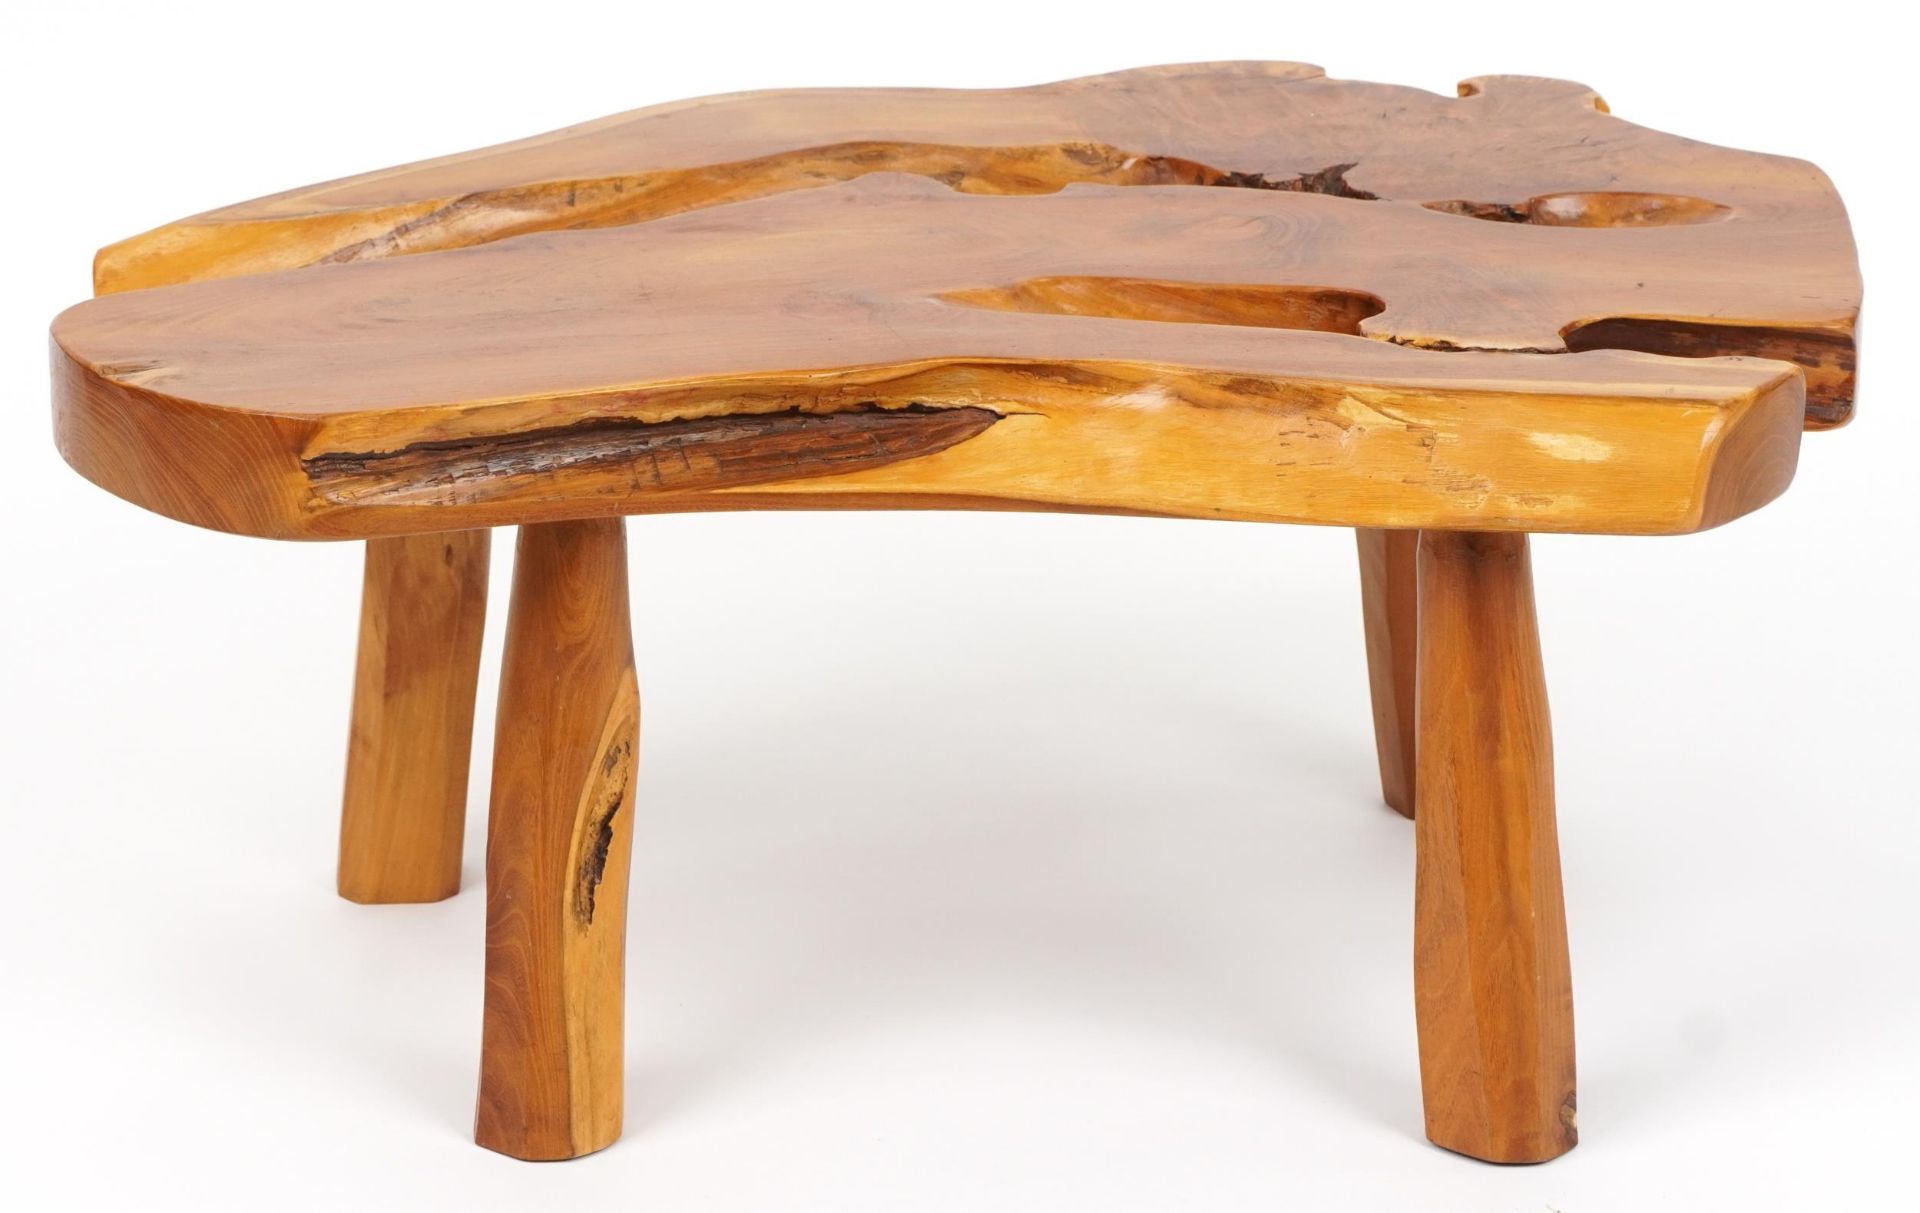 Vintage naturalistic root wood coffee table, 36.5cm H x 84cm W x 57cm D : For further information on - Image 2 of 4